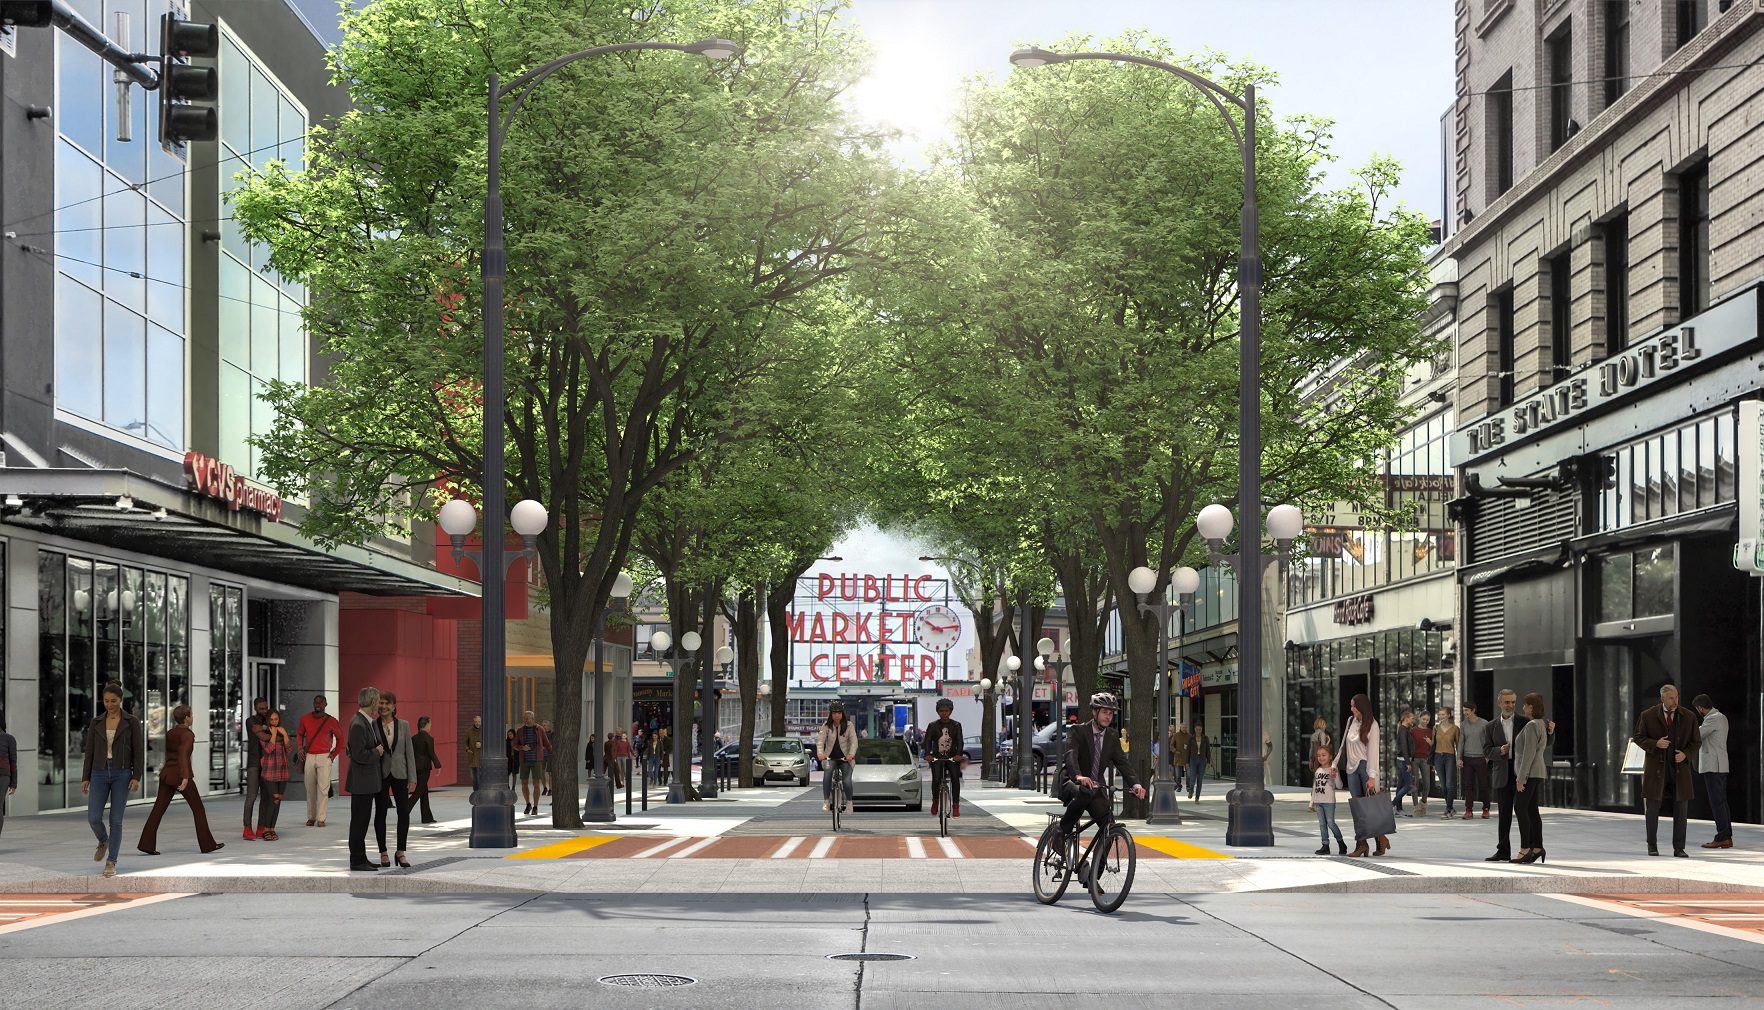 Rendering and visualization with people biking and walking along the street and sidewalk. Large trees and buildings are in the center and sides of the image.